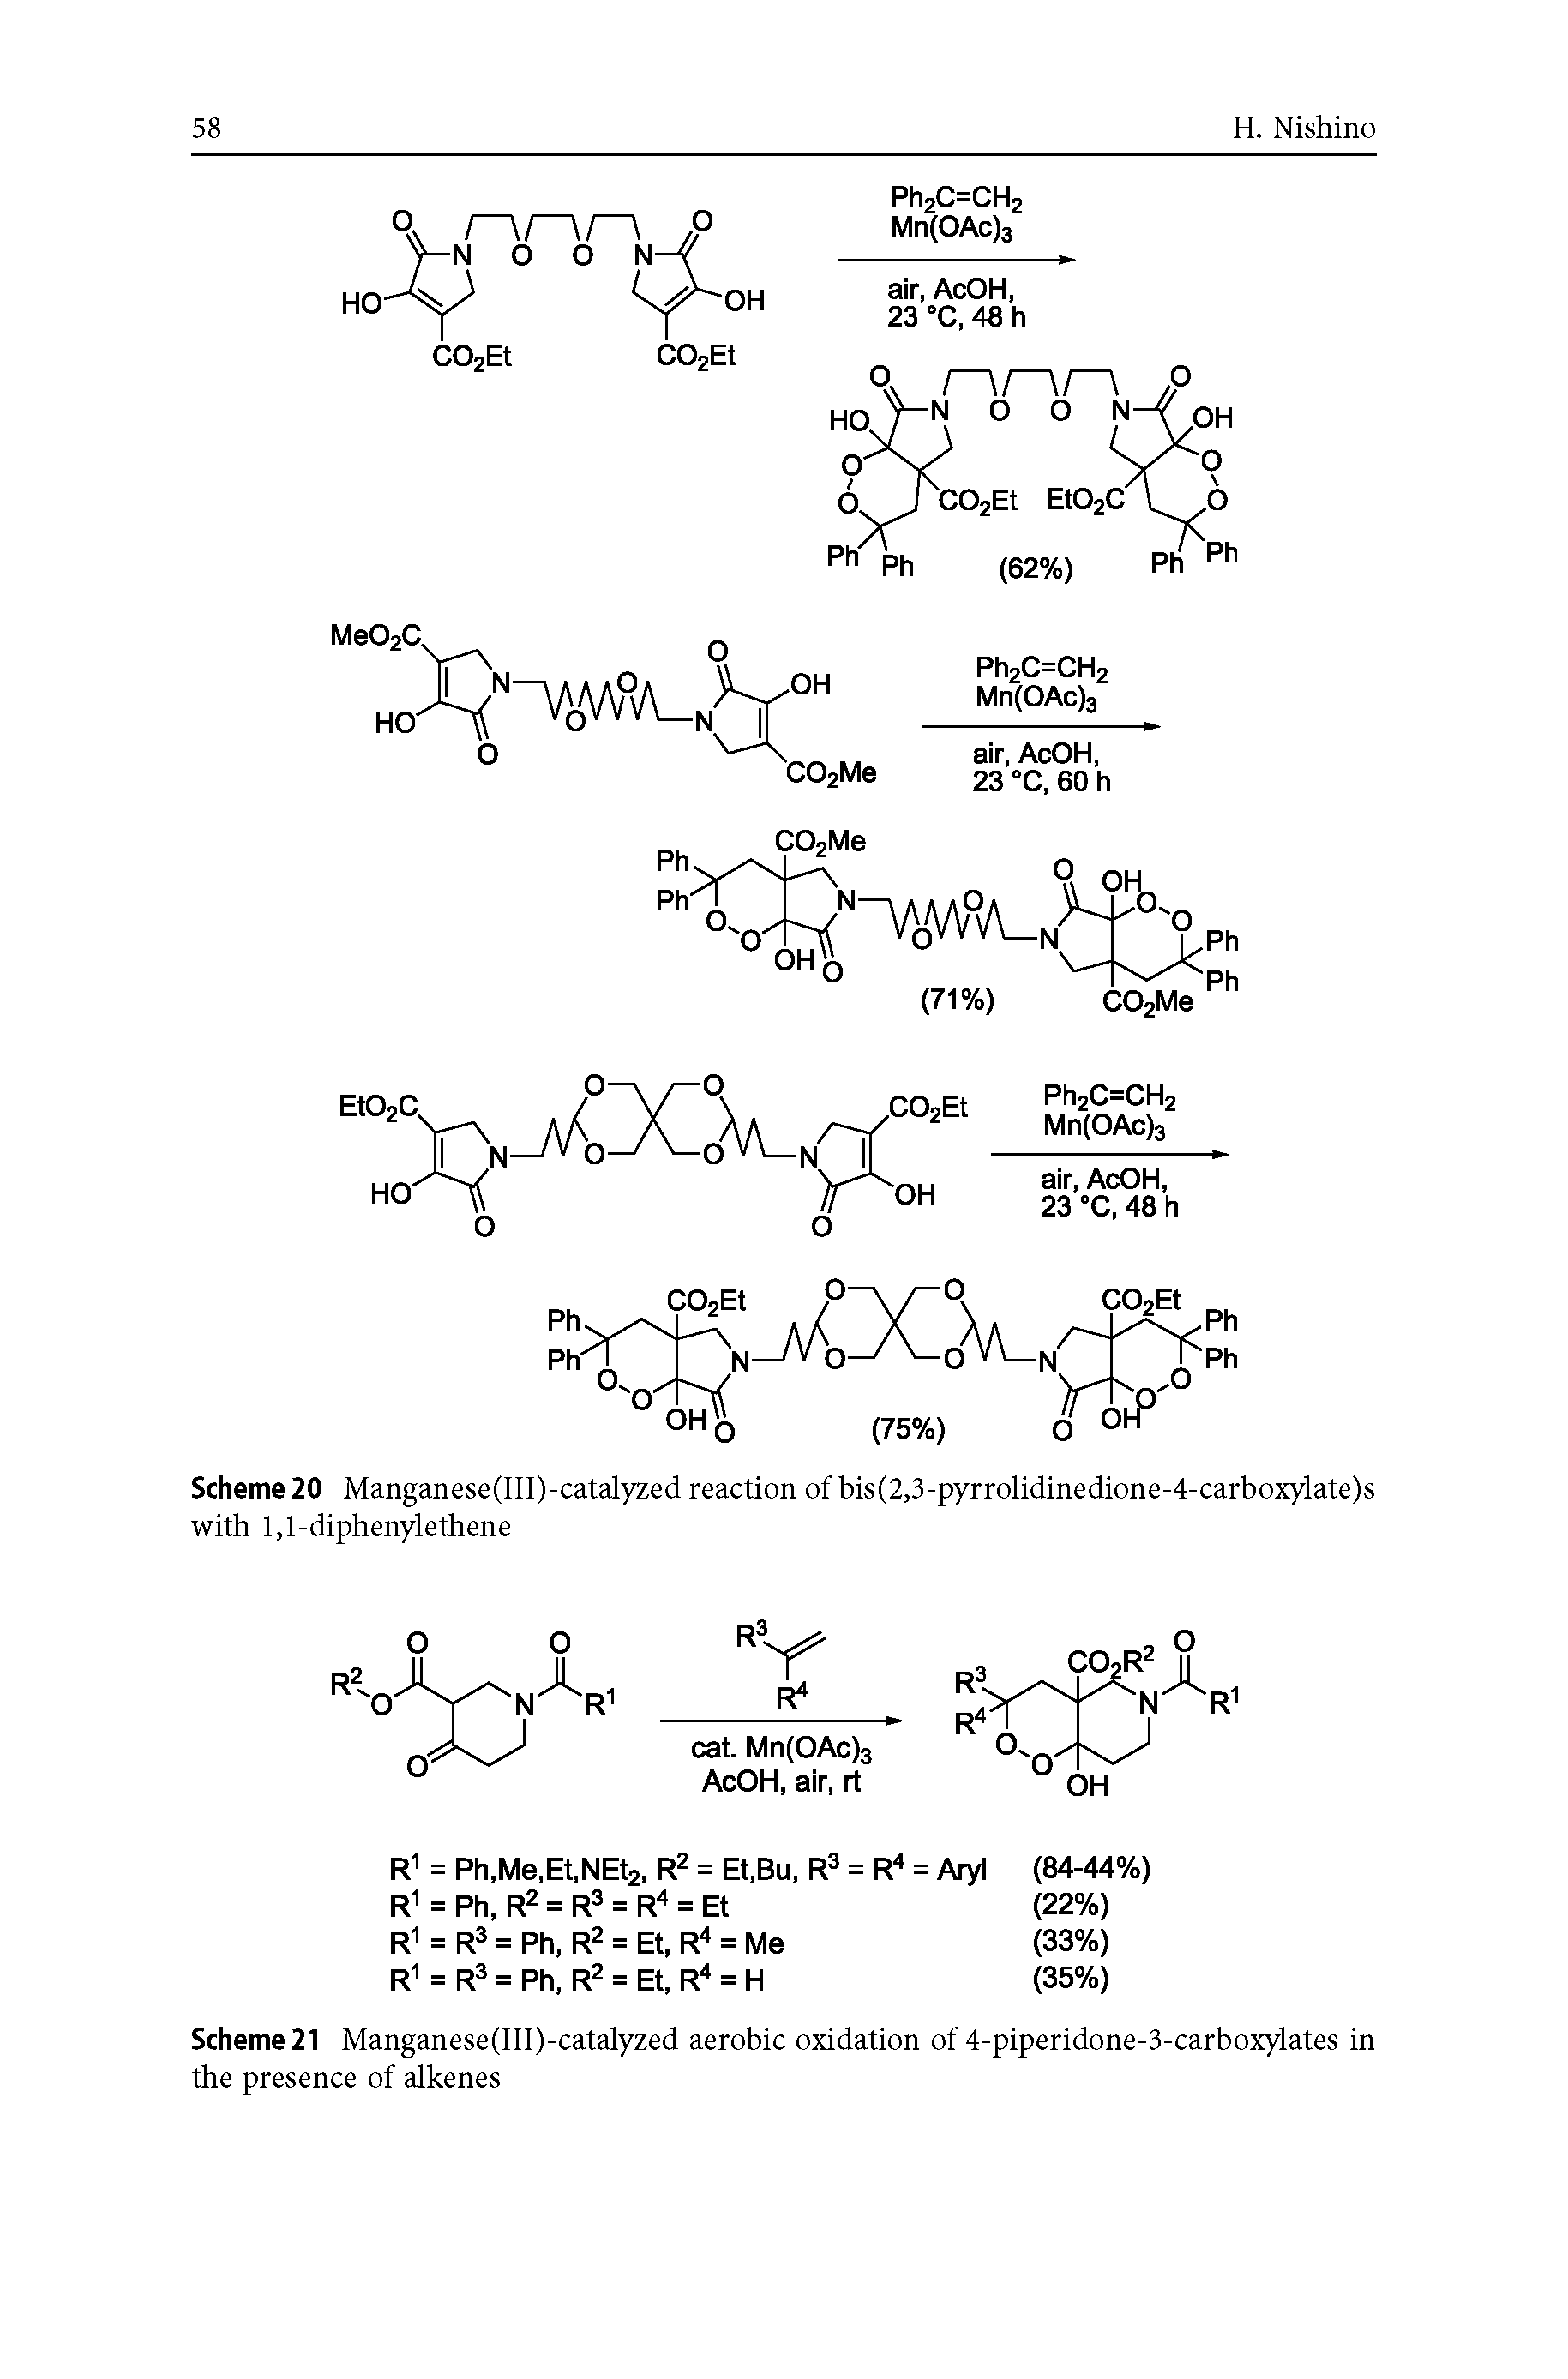 Scheme 21 Manganese(III)-catalyzed aerobic oxidation of 4-piperidone-3-carboxylates in the presence of alkenes...